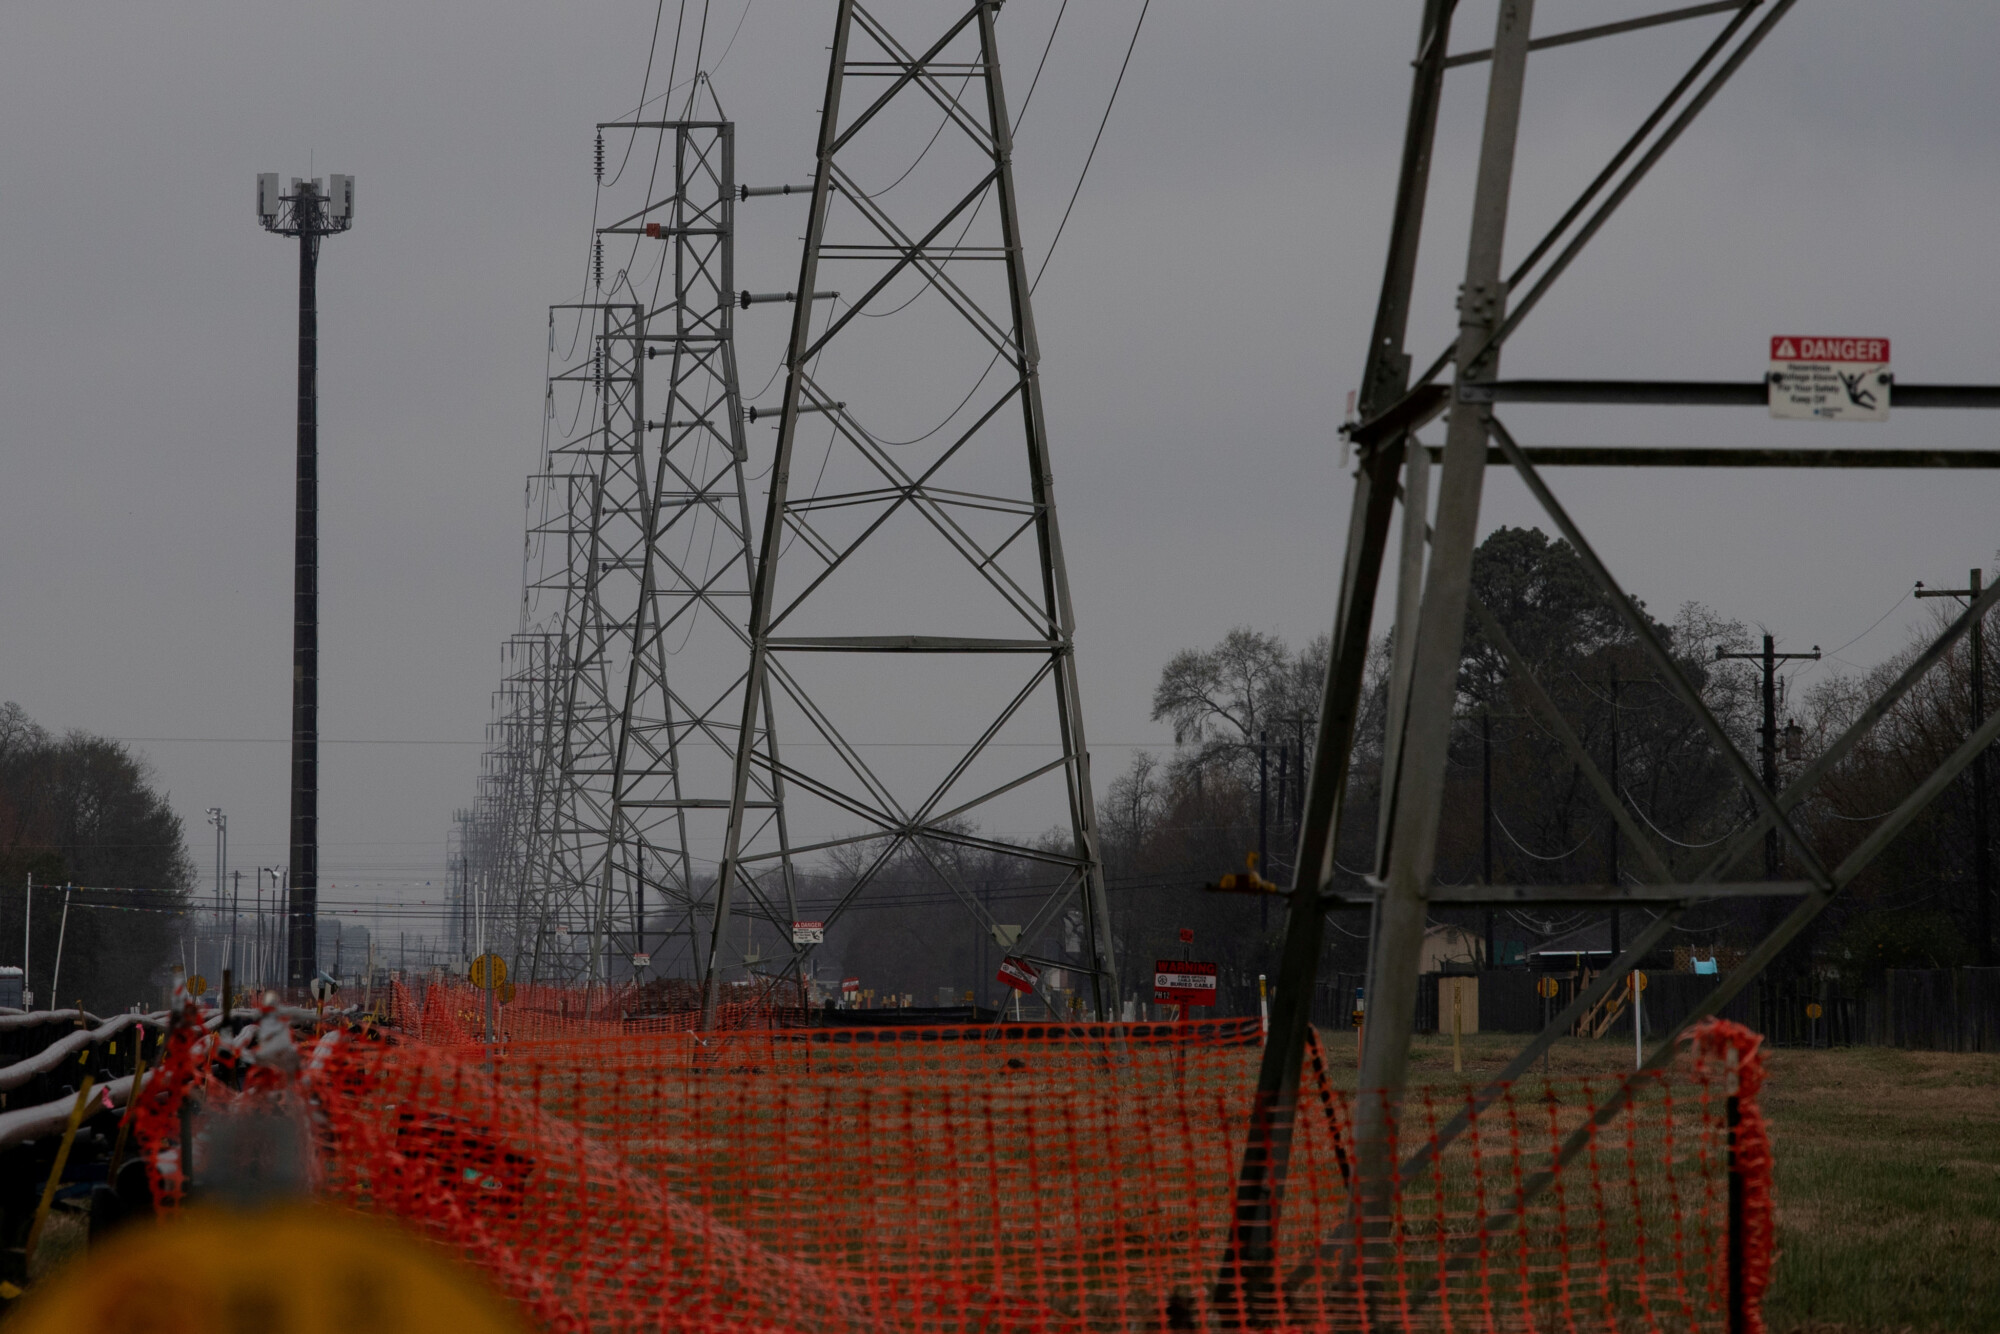 Texas Electricity Firm Files for Bankruptcy Citing $1.8 Billion in Claims From Grid Operator